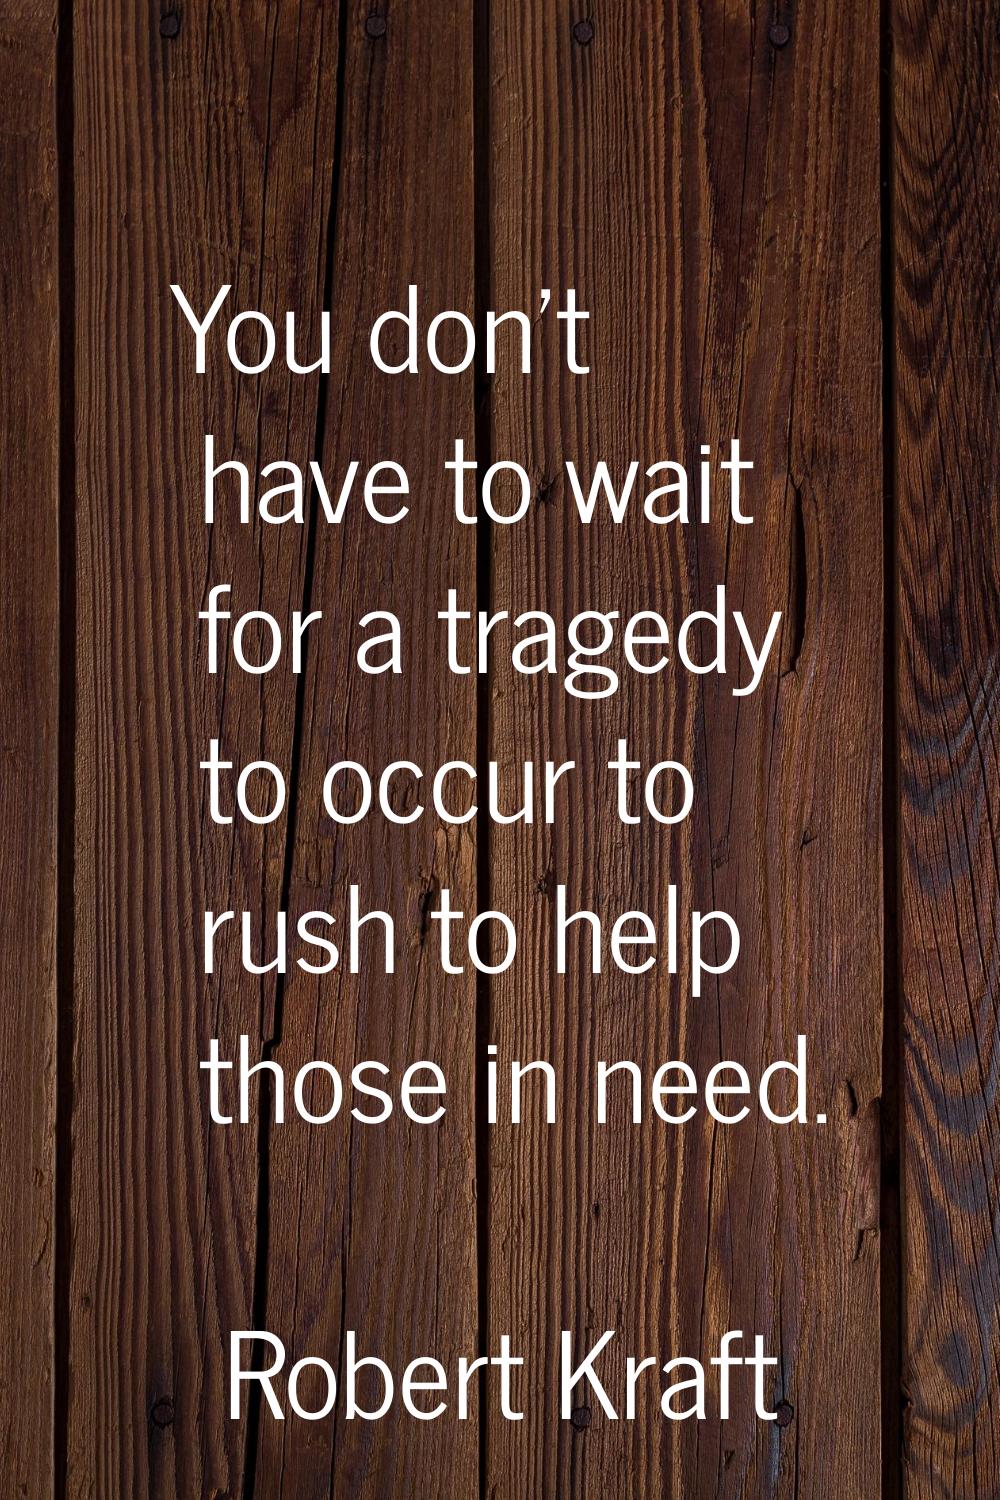 You don't have to wait for a tragedy to occur to rush to help those in need.